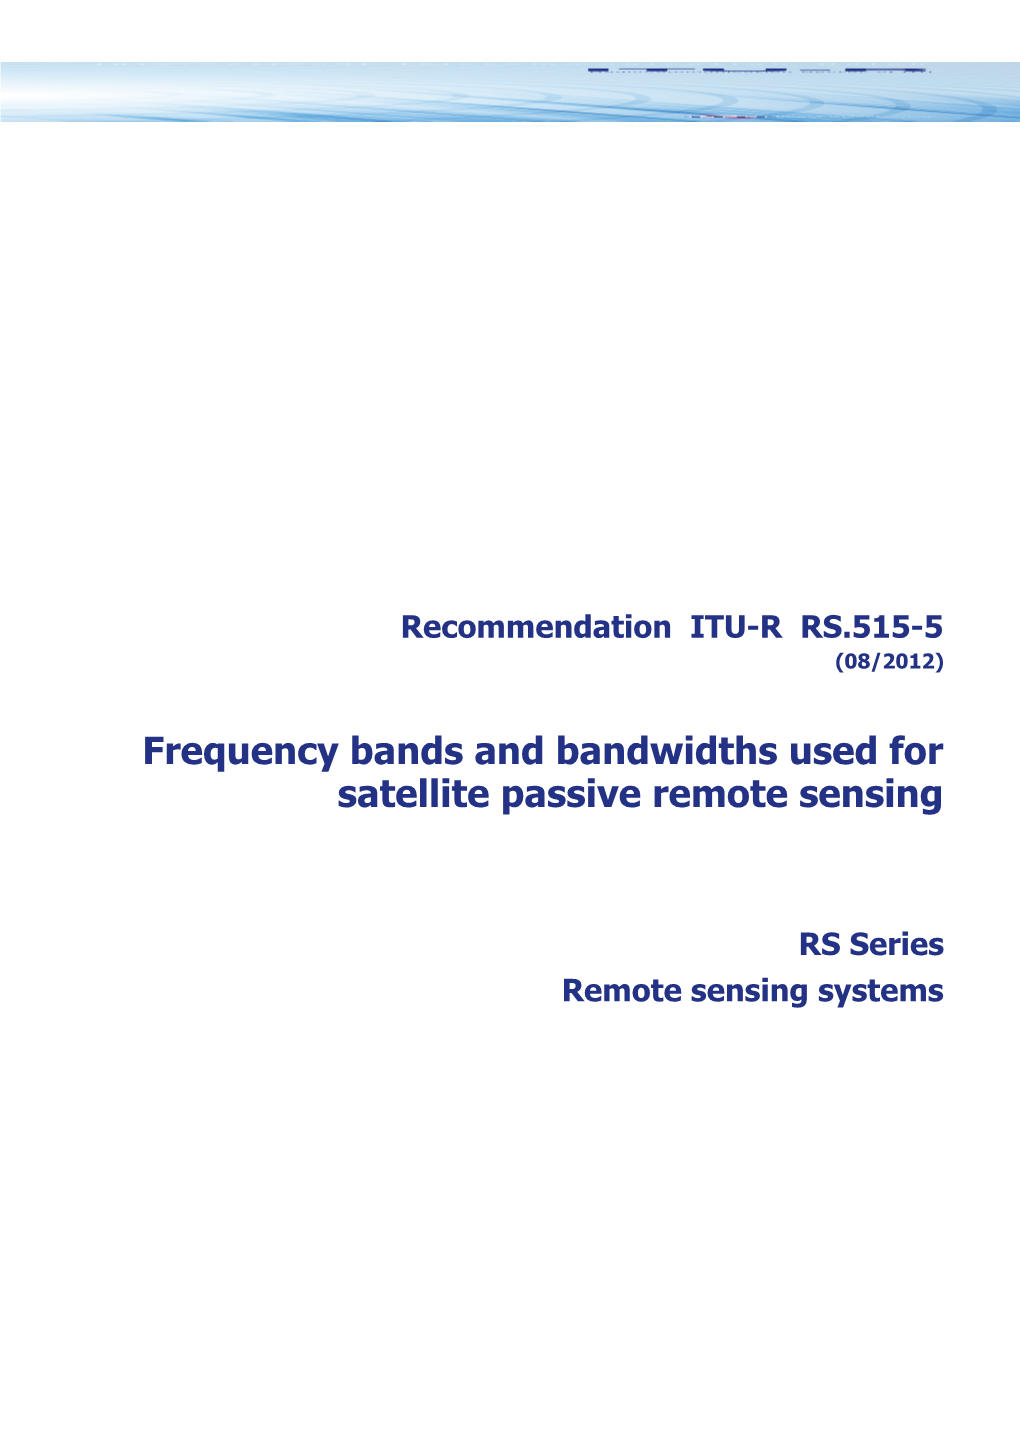 RECOMMENDATION ITU-R RS.515-5* - Frequency Bands and Bandwidths Used for Satellite Passive